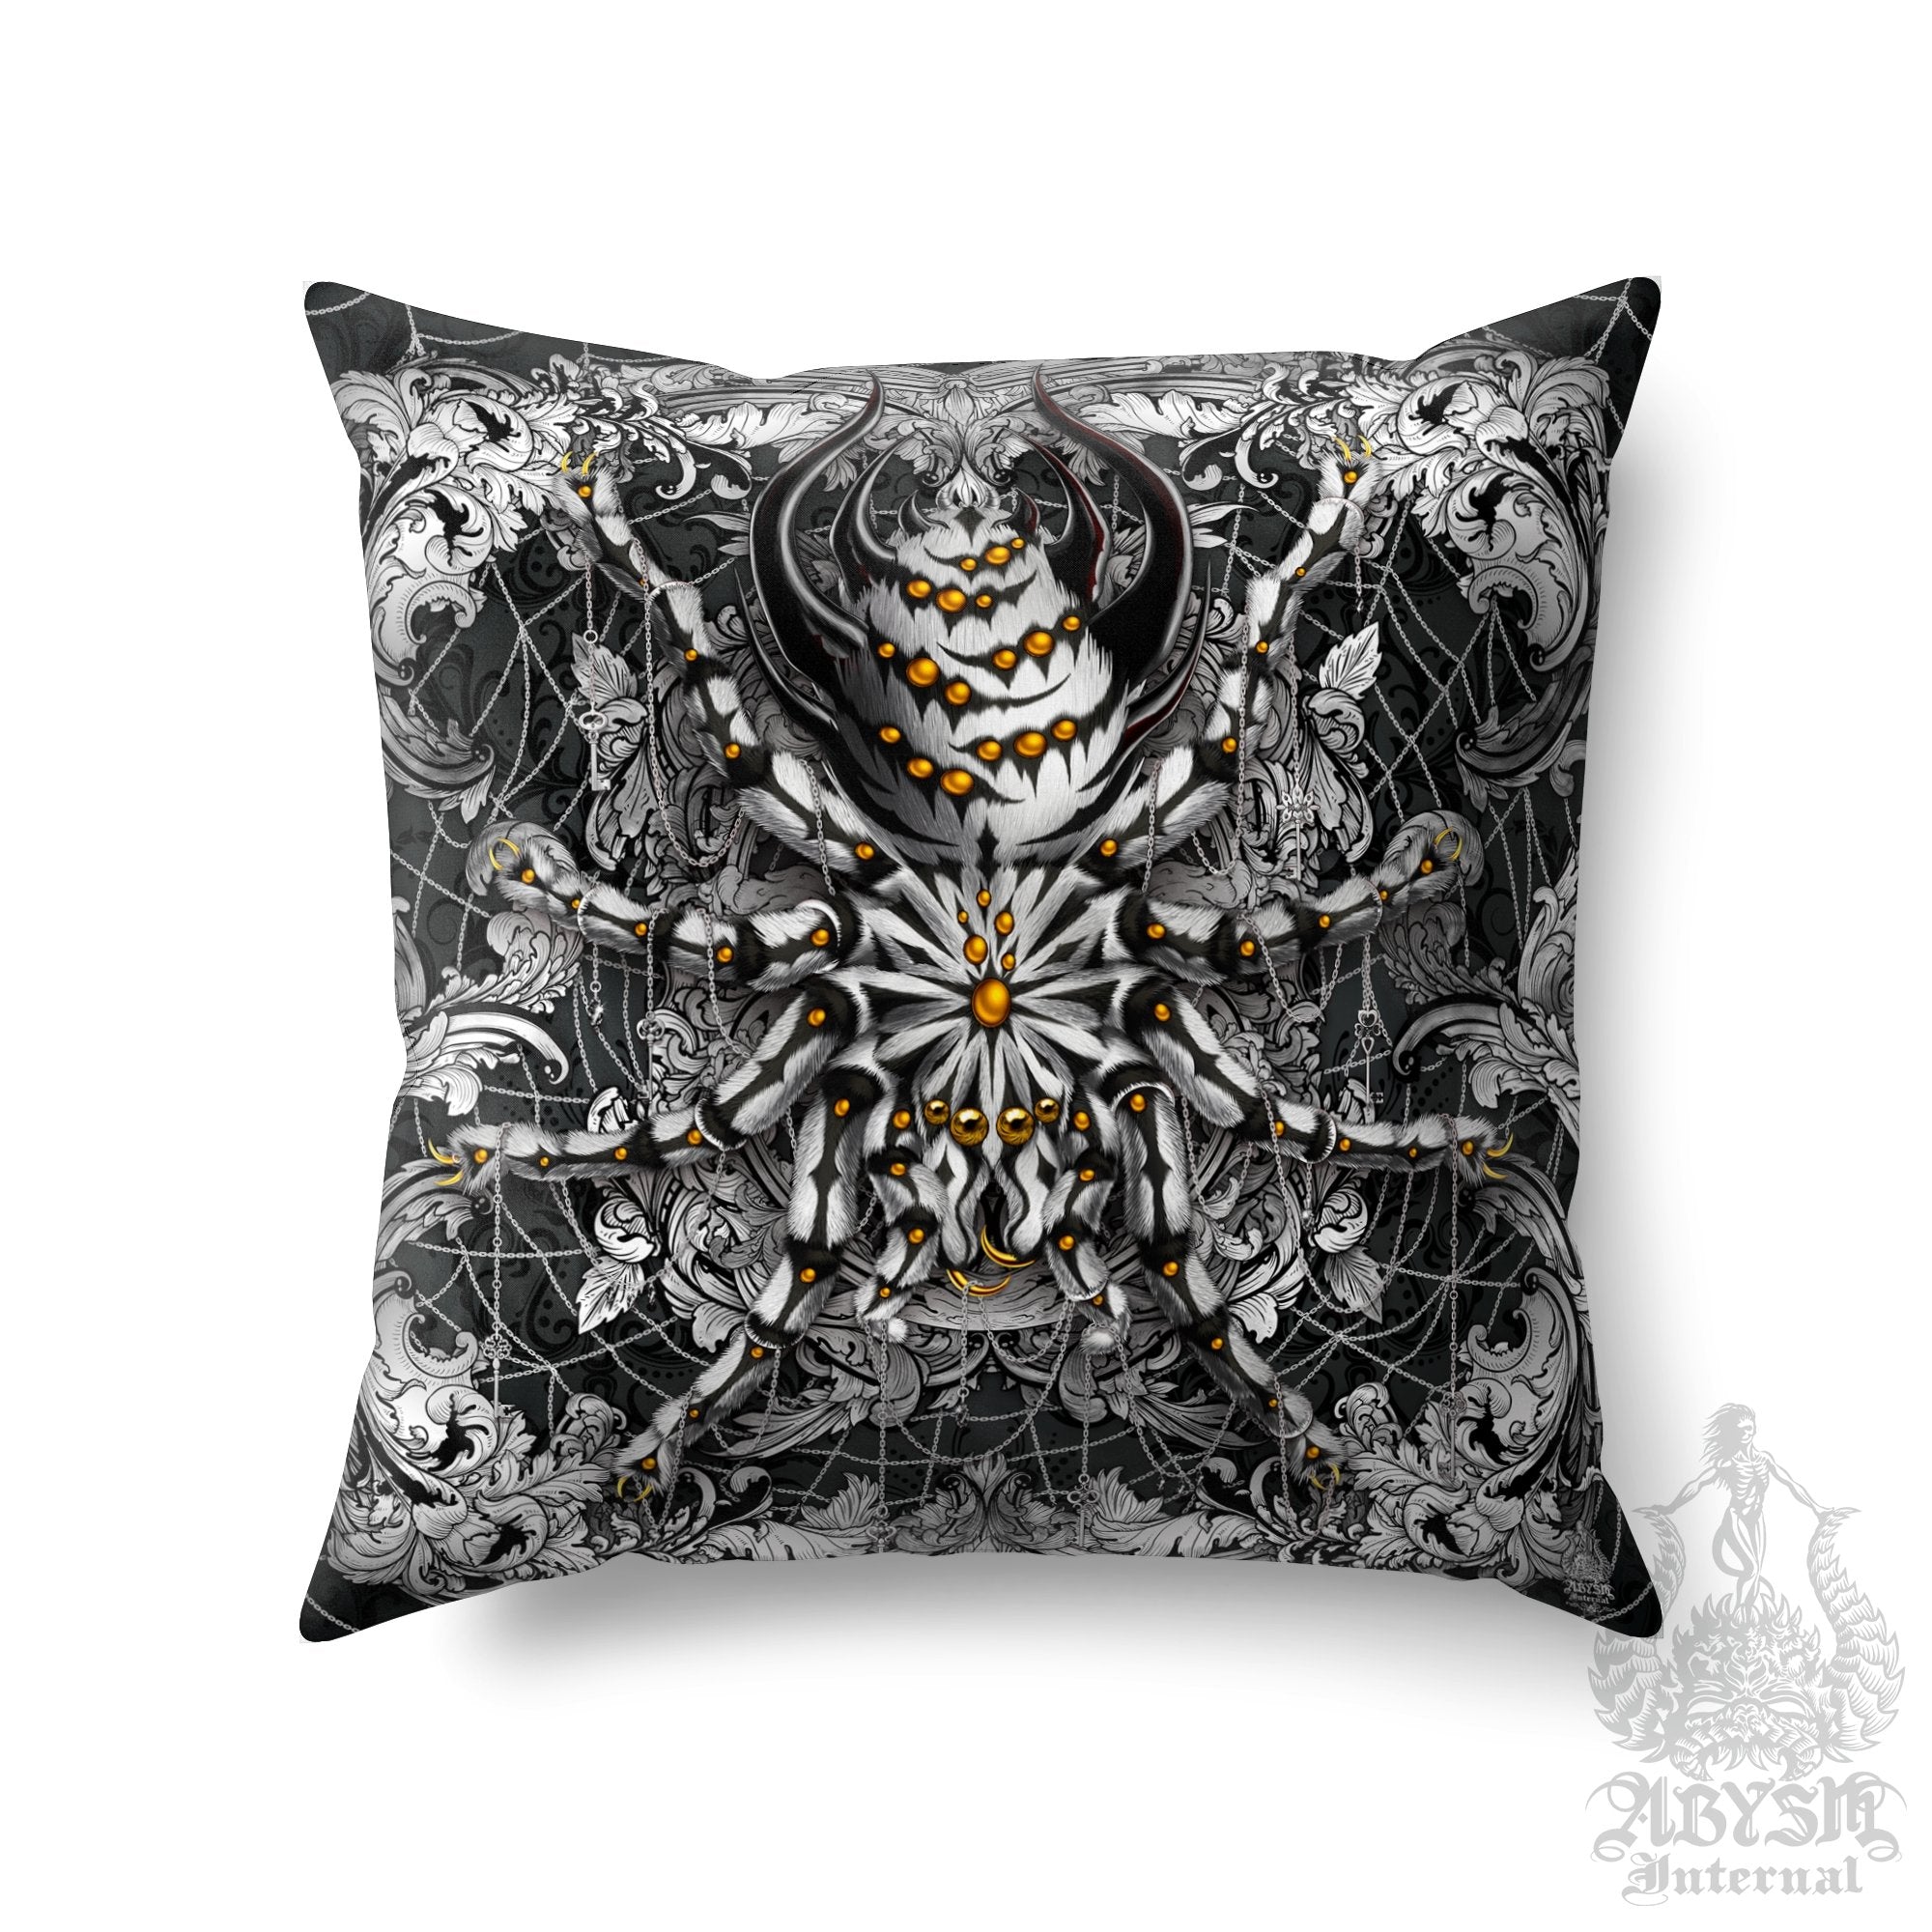 Spider Throw Pillow, Decorative Accent Cushion, Eclectic Room Decor, Alternative and Funky Home - Tarantula, Silver Black - Abysm Internal